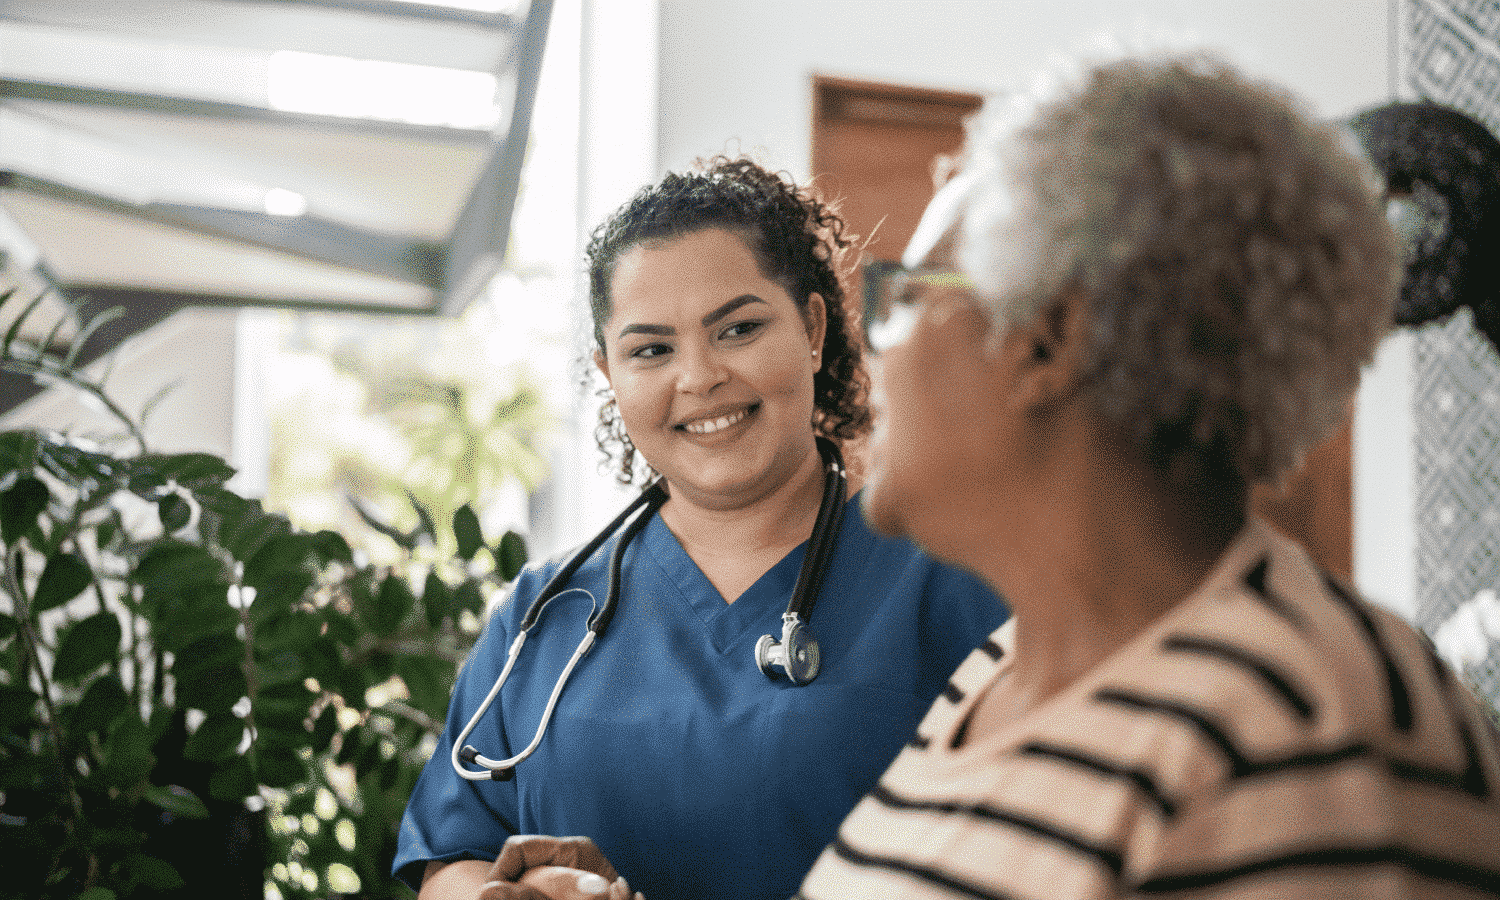 a nurse looking at an older woman and smiling